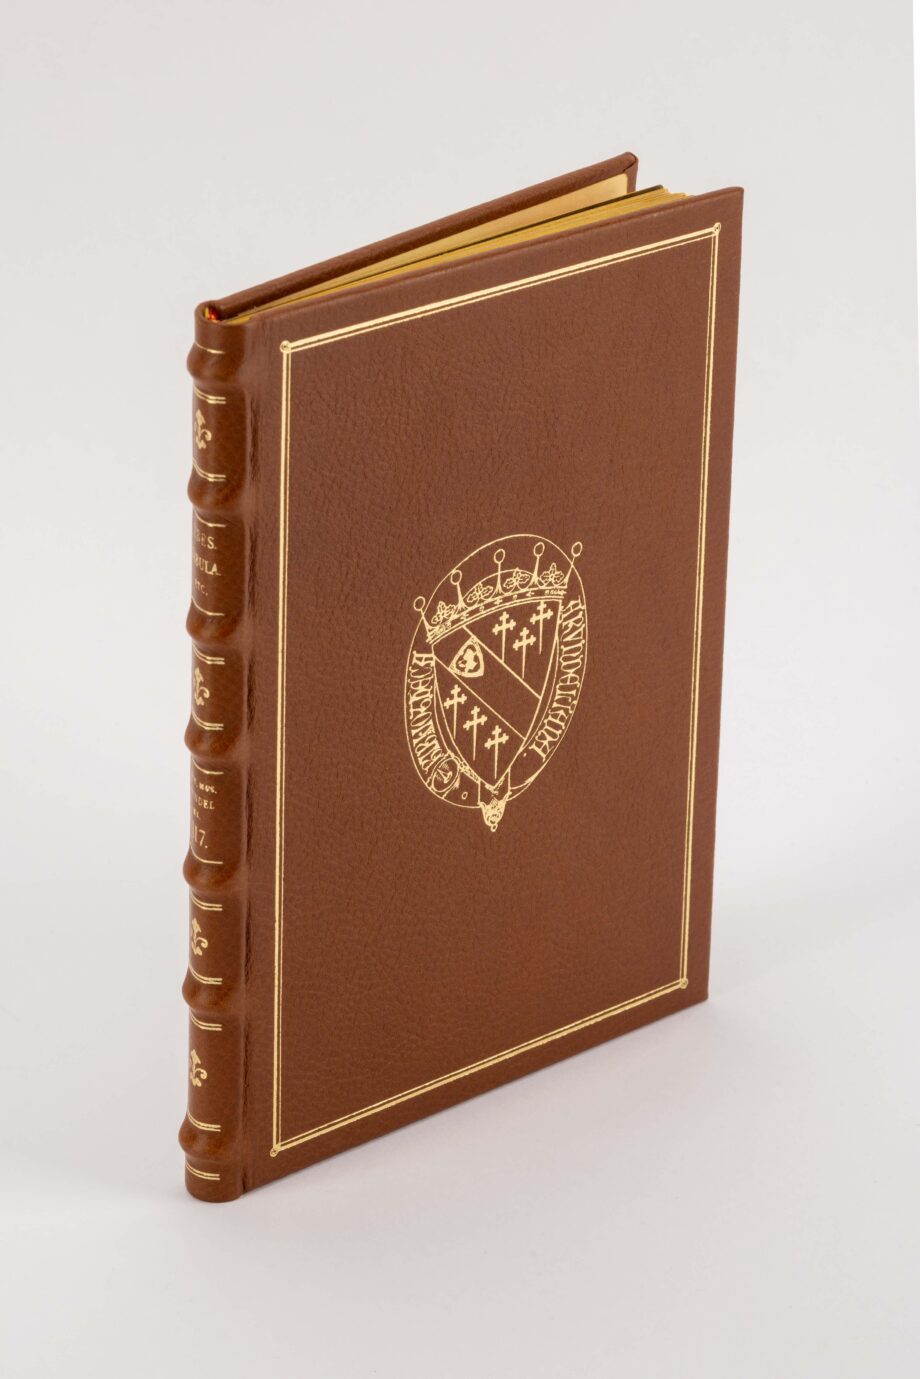 Facsimile edition from the Tabula Cebetis with gold embossed brown leather binding.